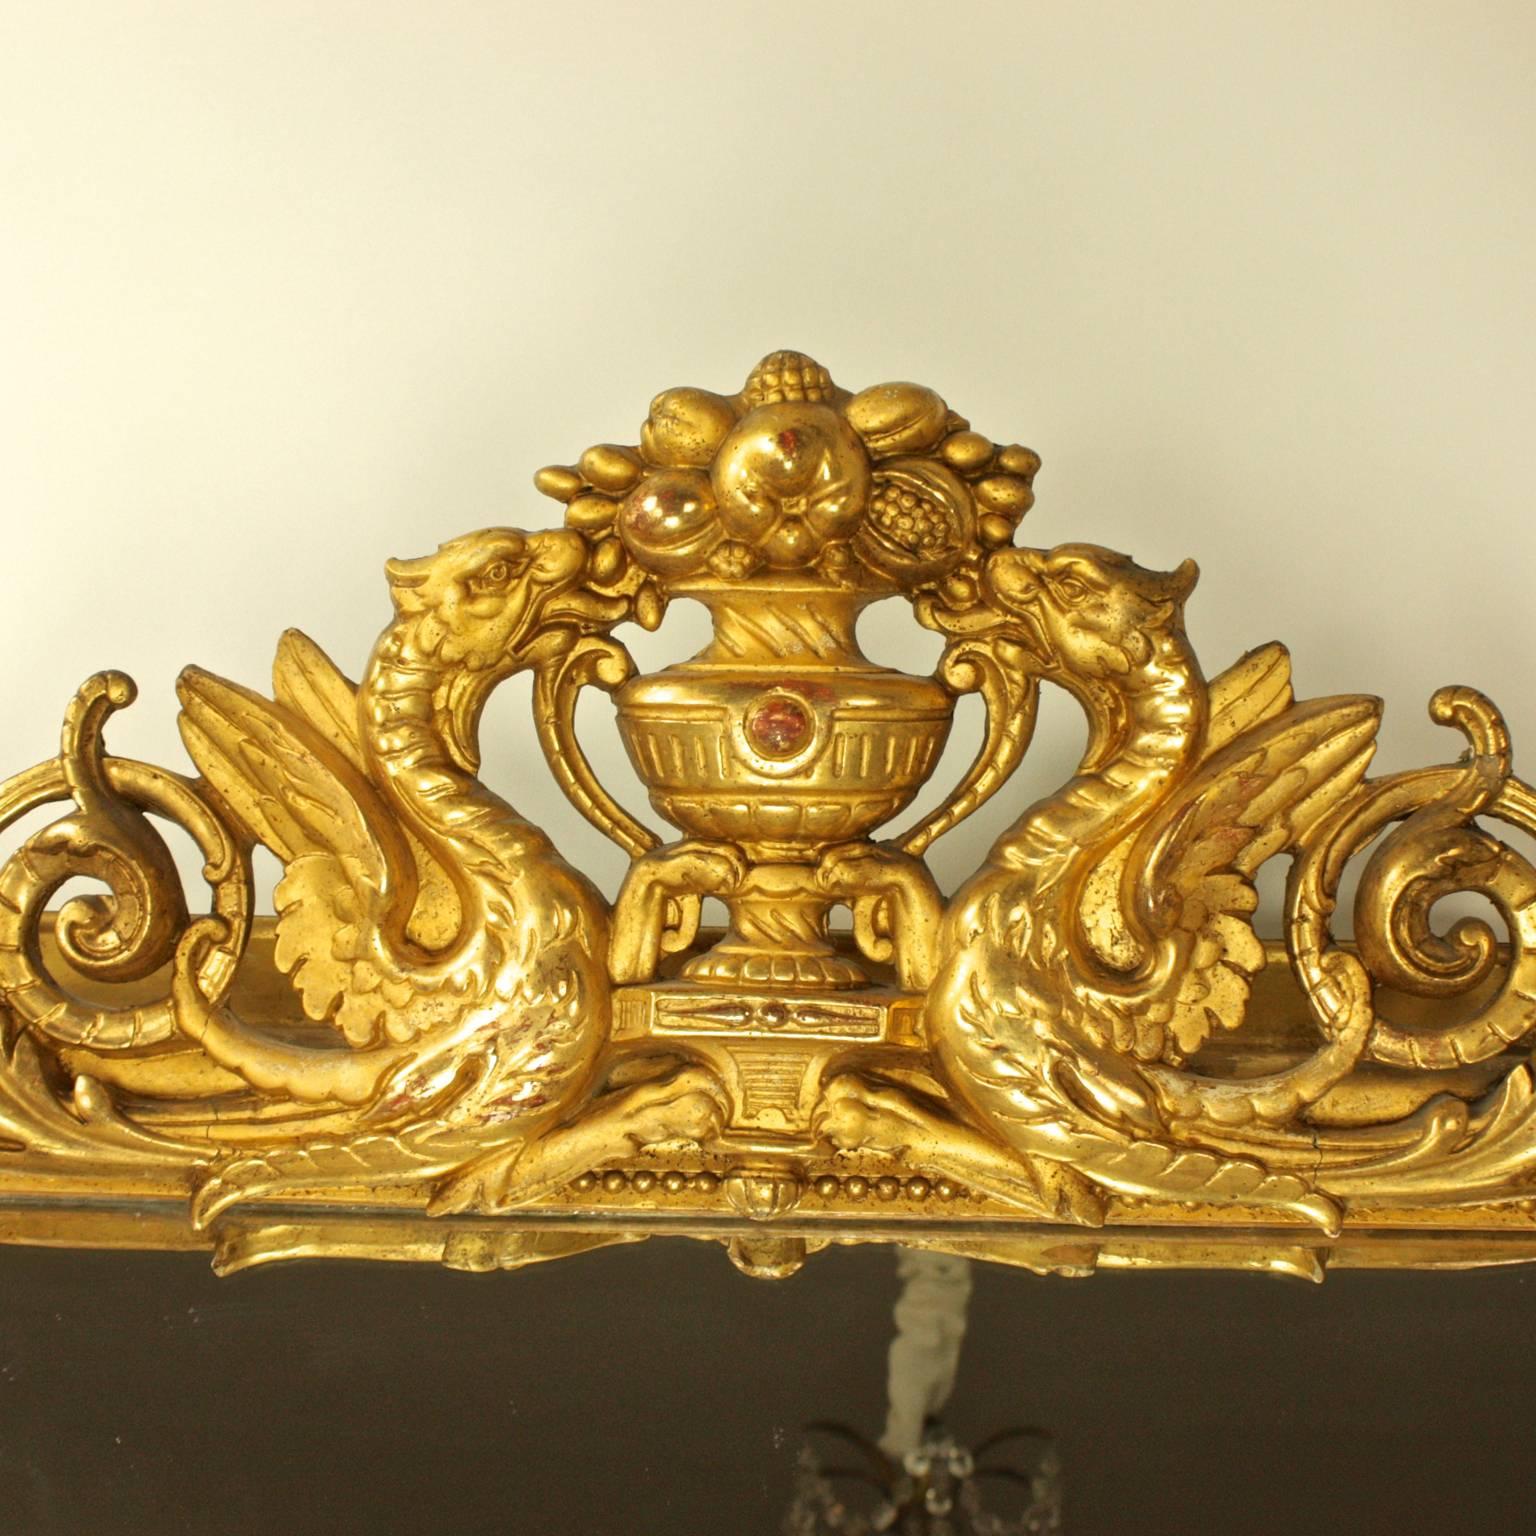 Carved Large over 5 Feet high 19th Century French Giltwood Mirror